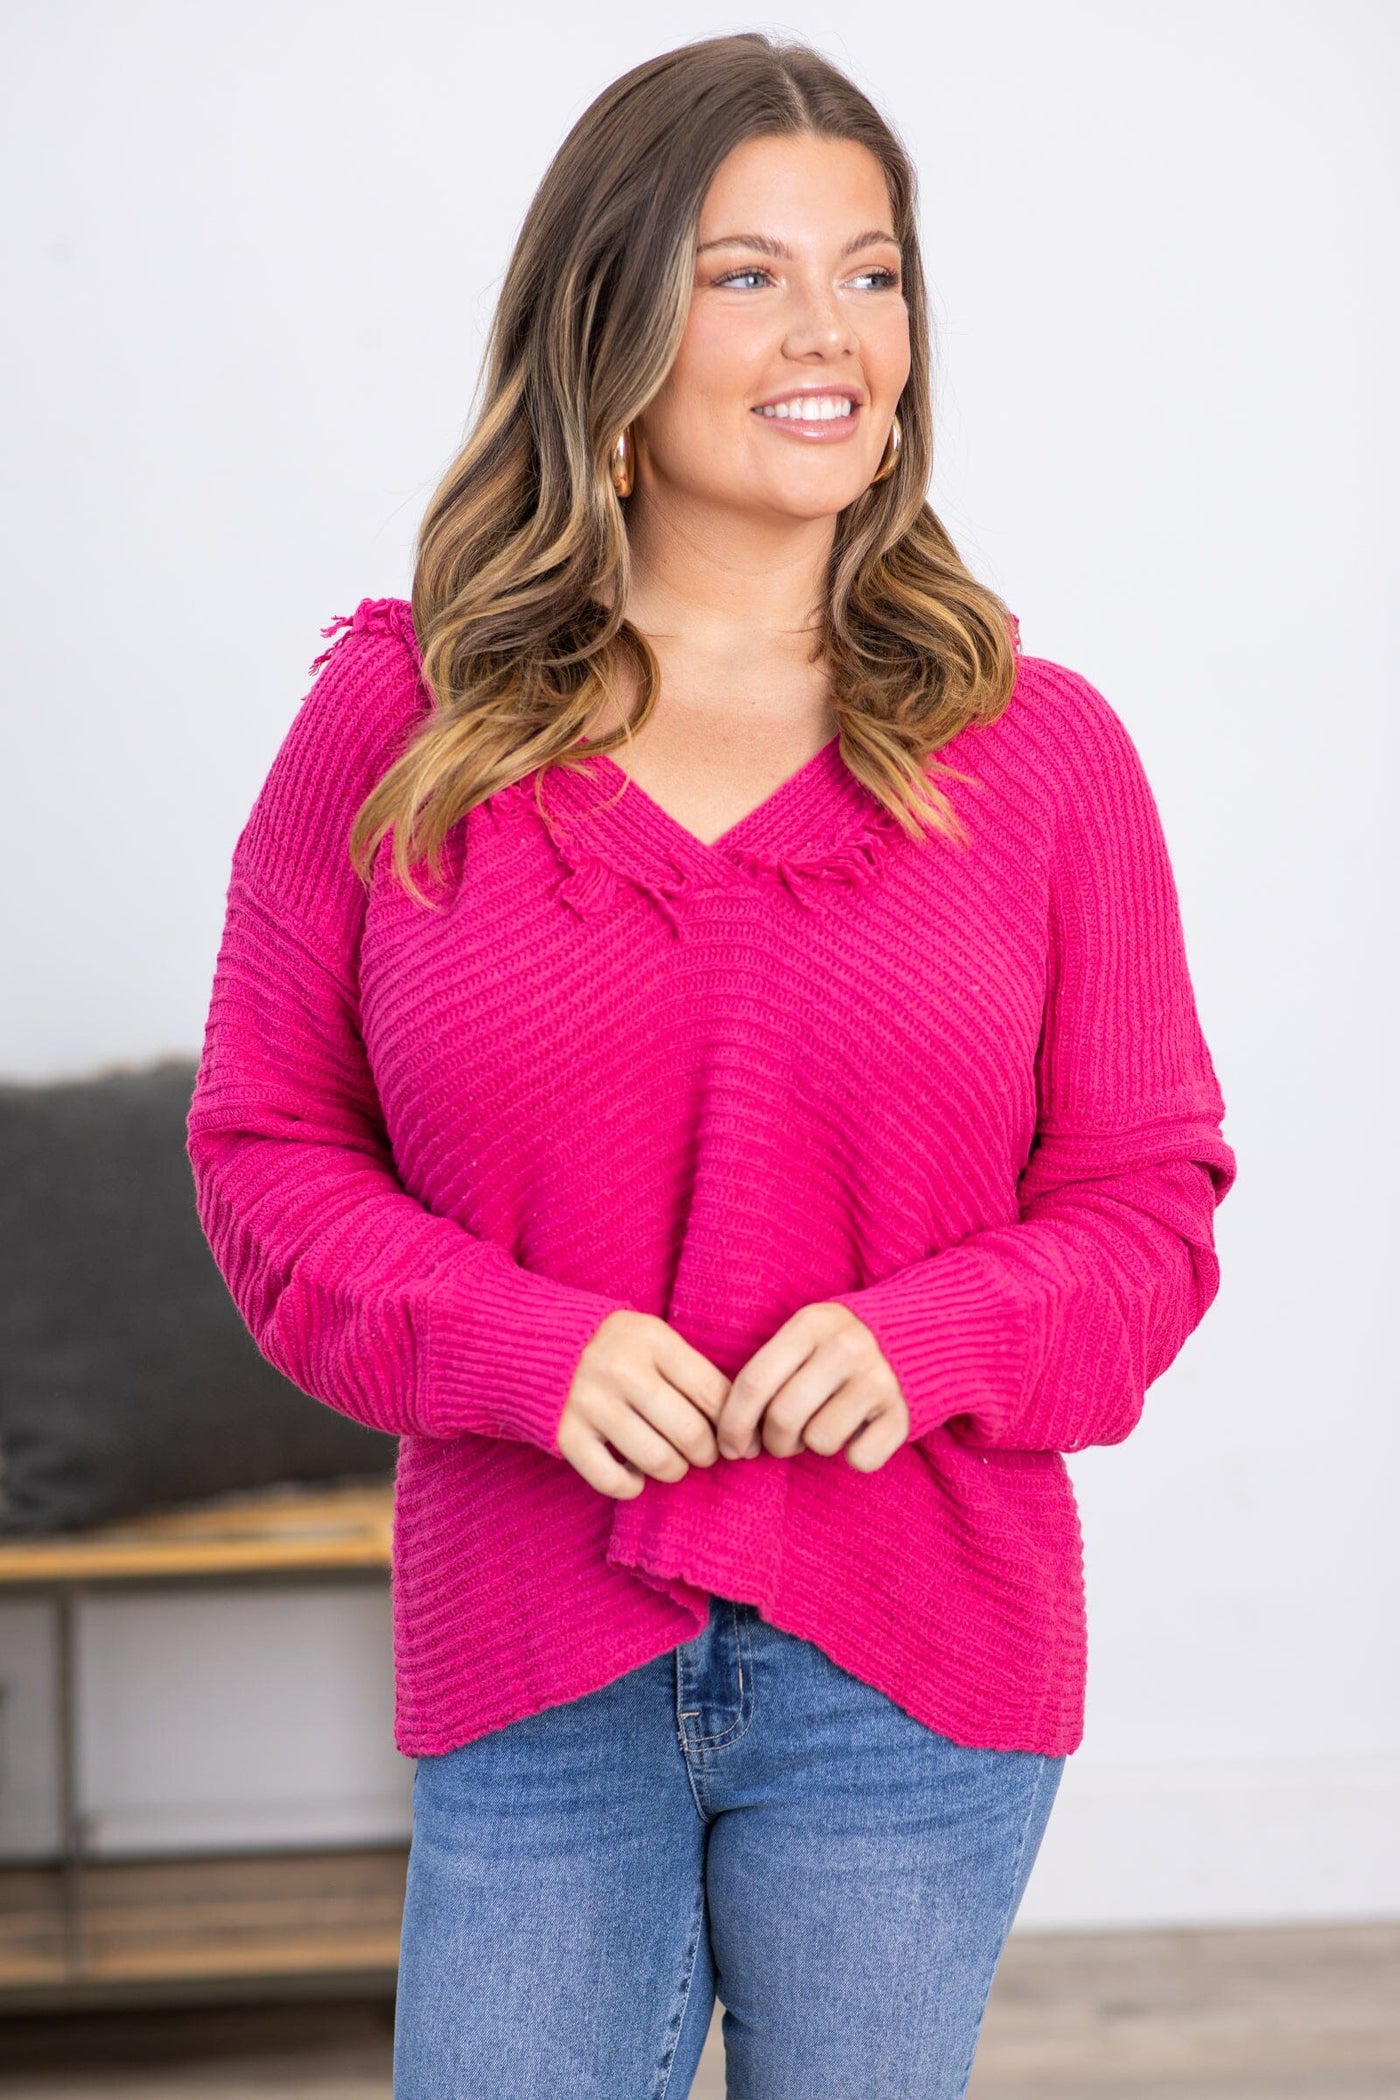 Hot Pink Hooded Sweater With Fringe - Filly Flair